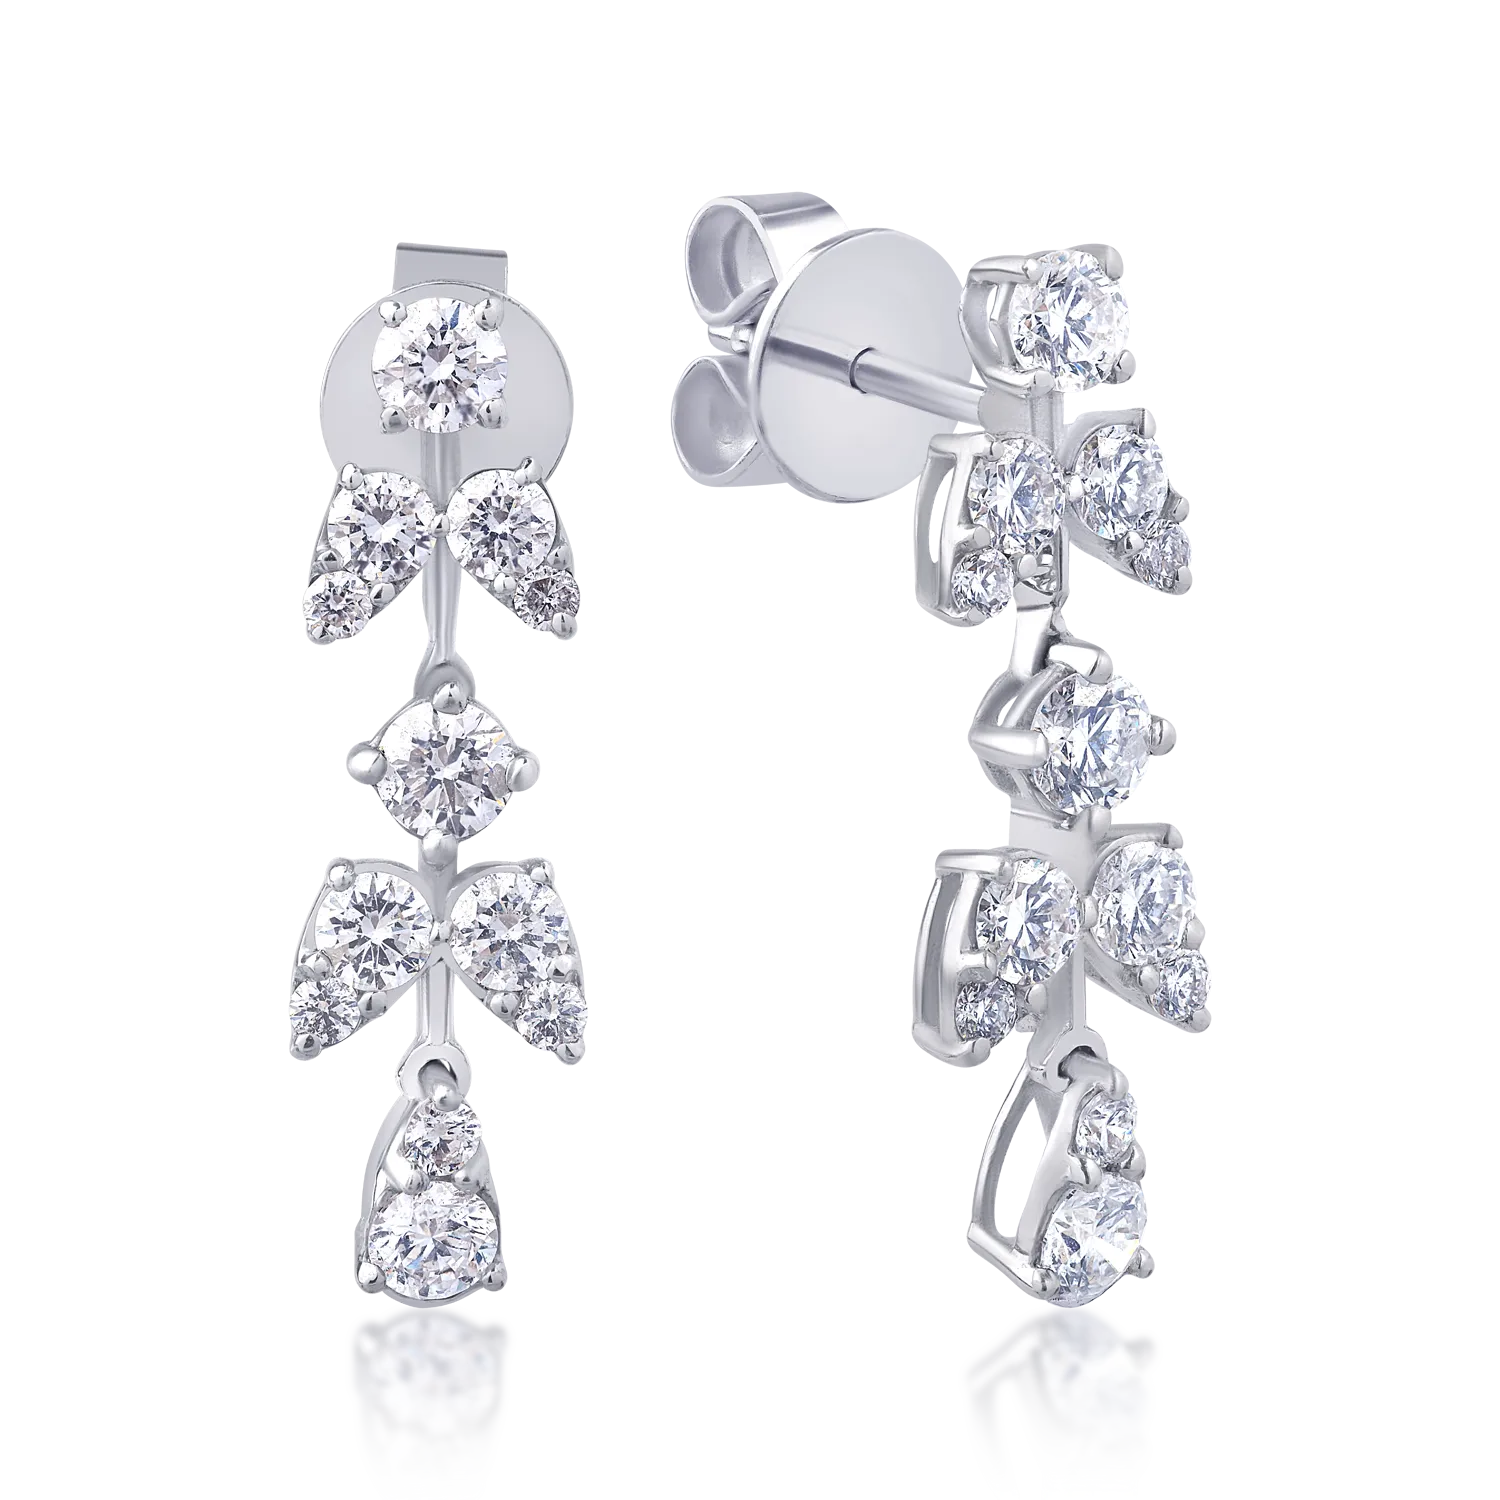 18K white gold earrings with 1.48ct diamonds